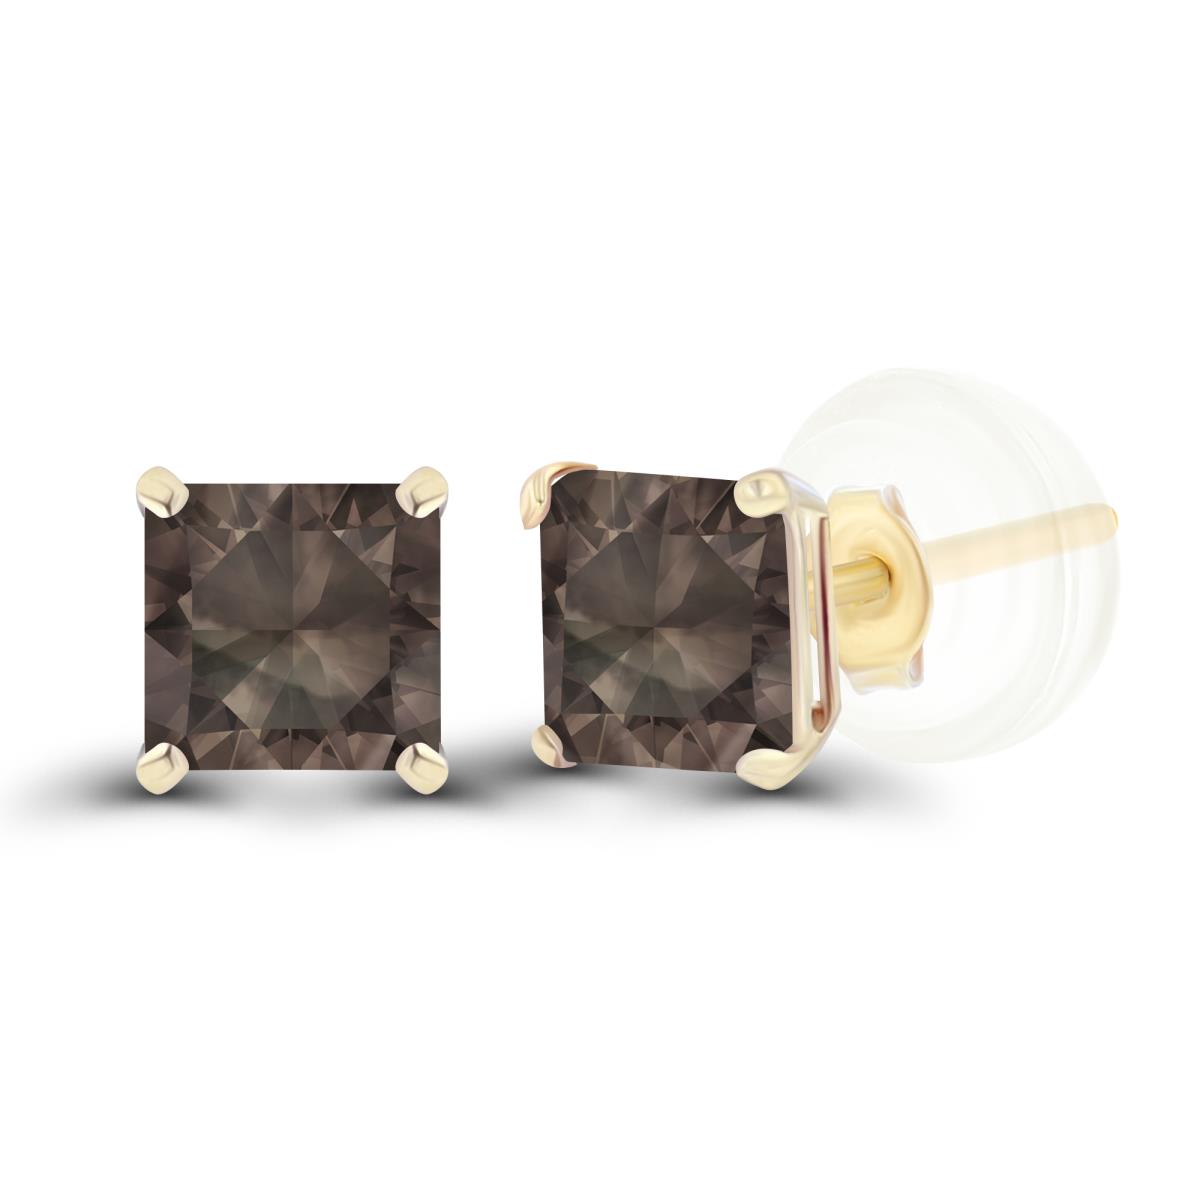 14K Yellow Gold 4mm Square Smokey Quartz Basket Stud Earrings with Silicone Back